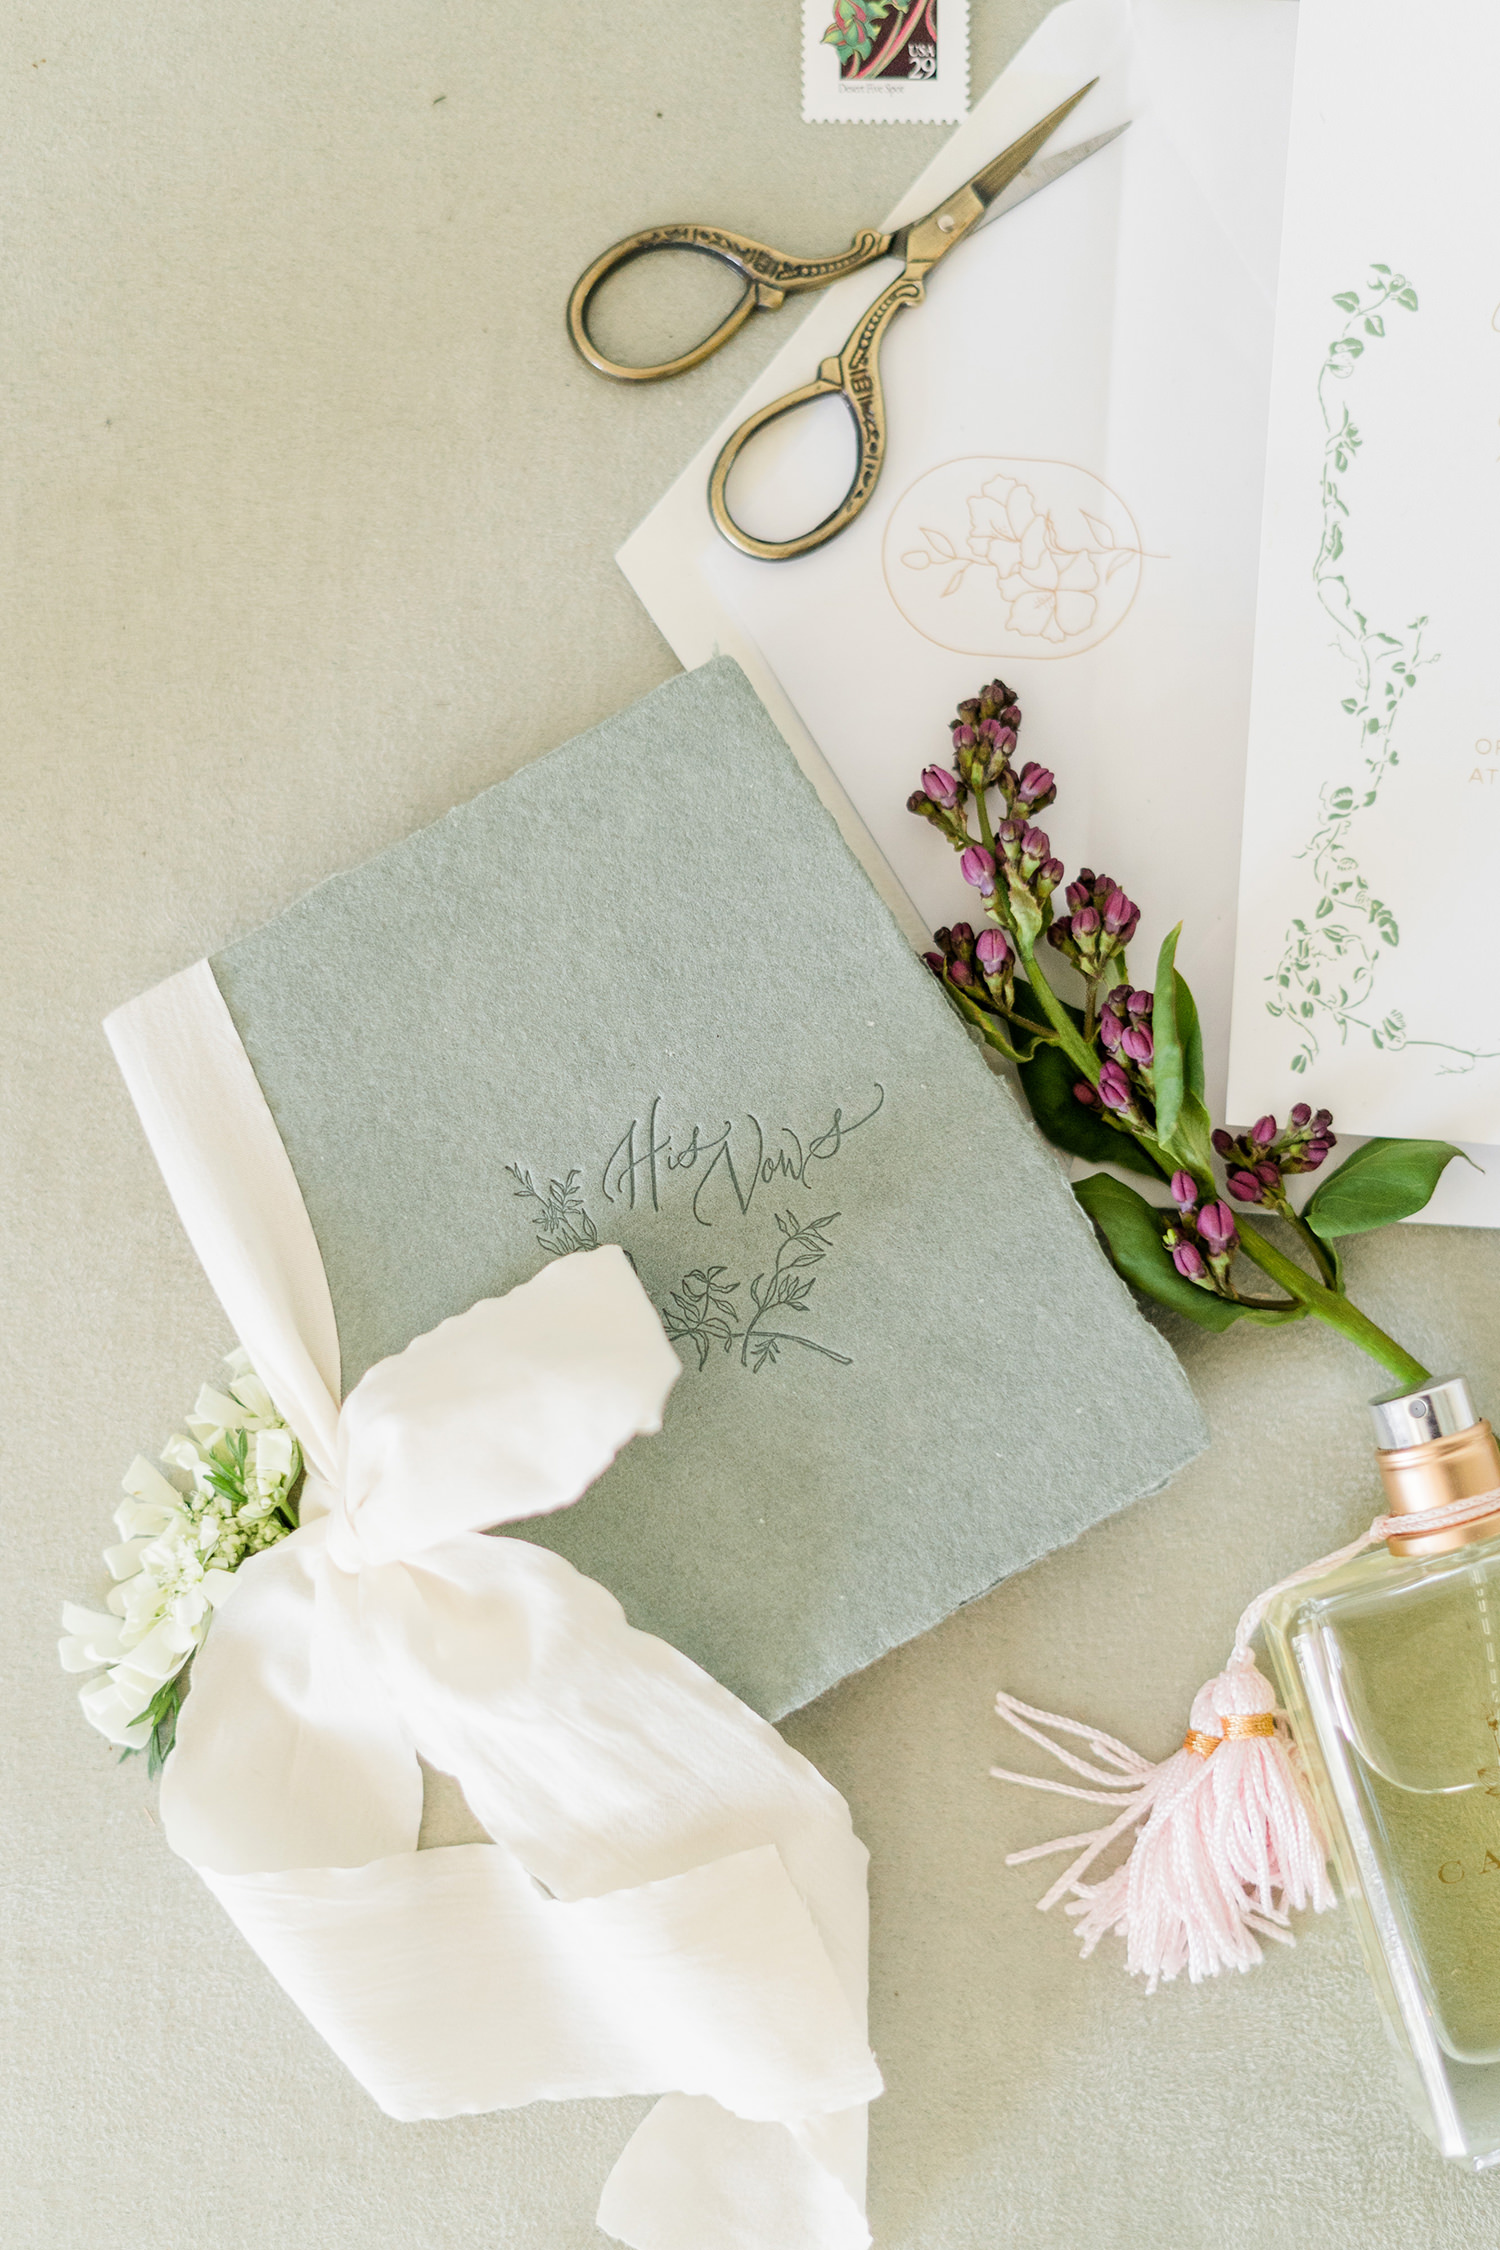 Wedding Decor Inspiration for a Sonoma, CA Wedding by Adrienne and Dani Photography